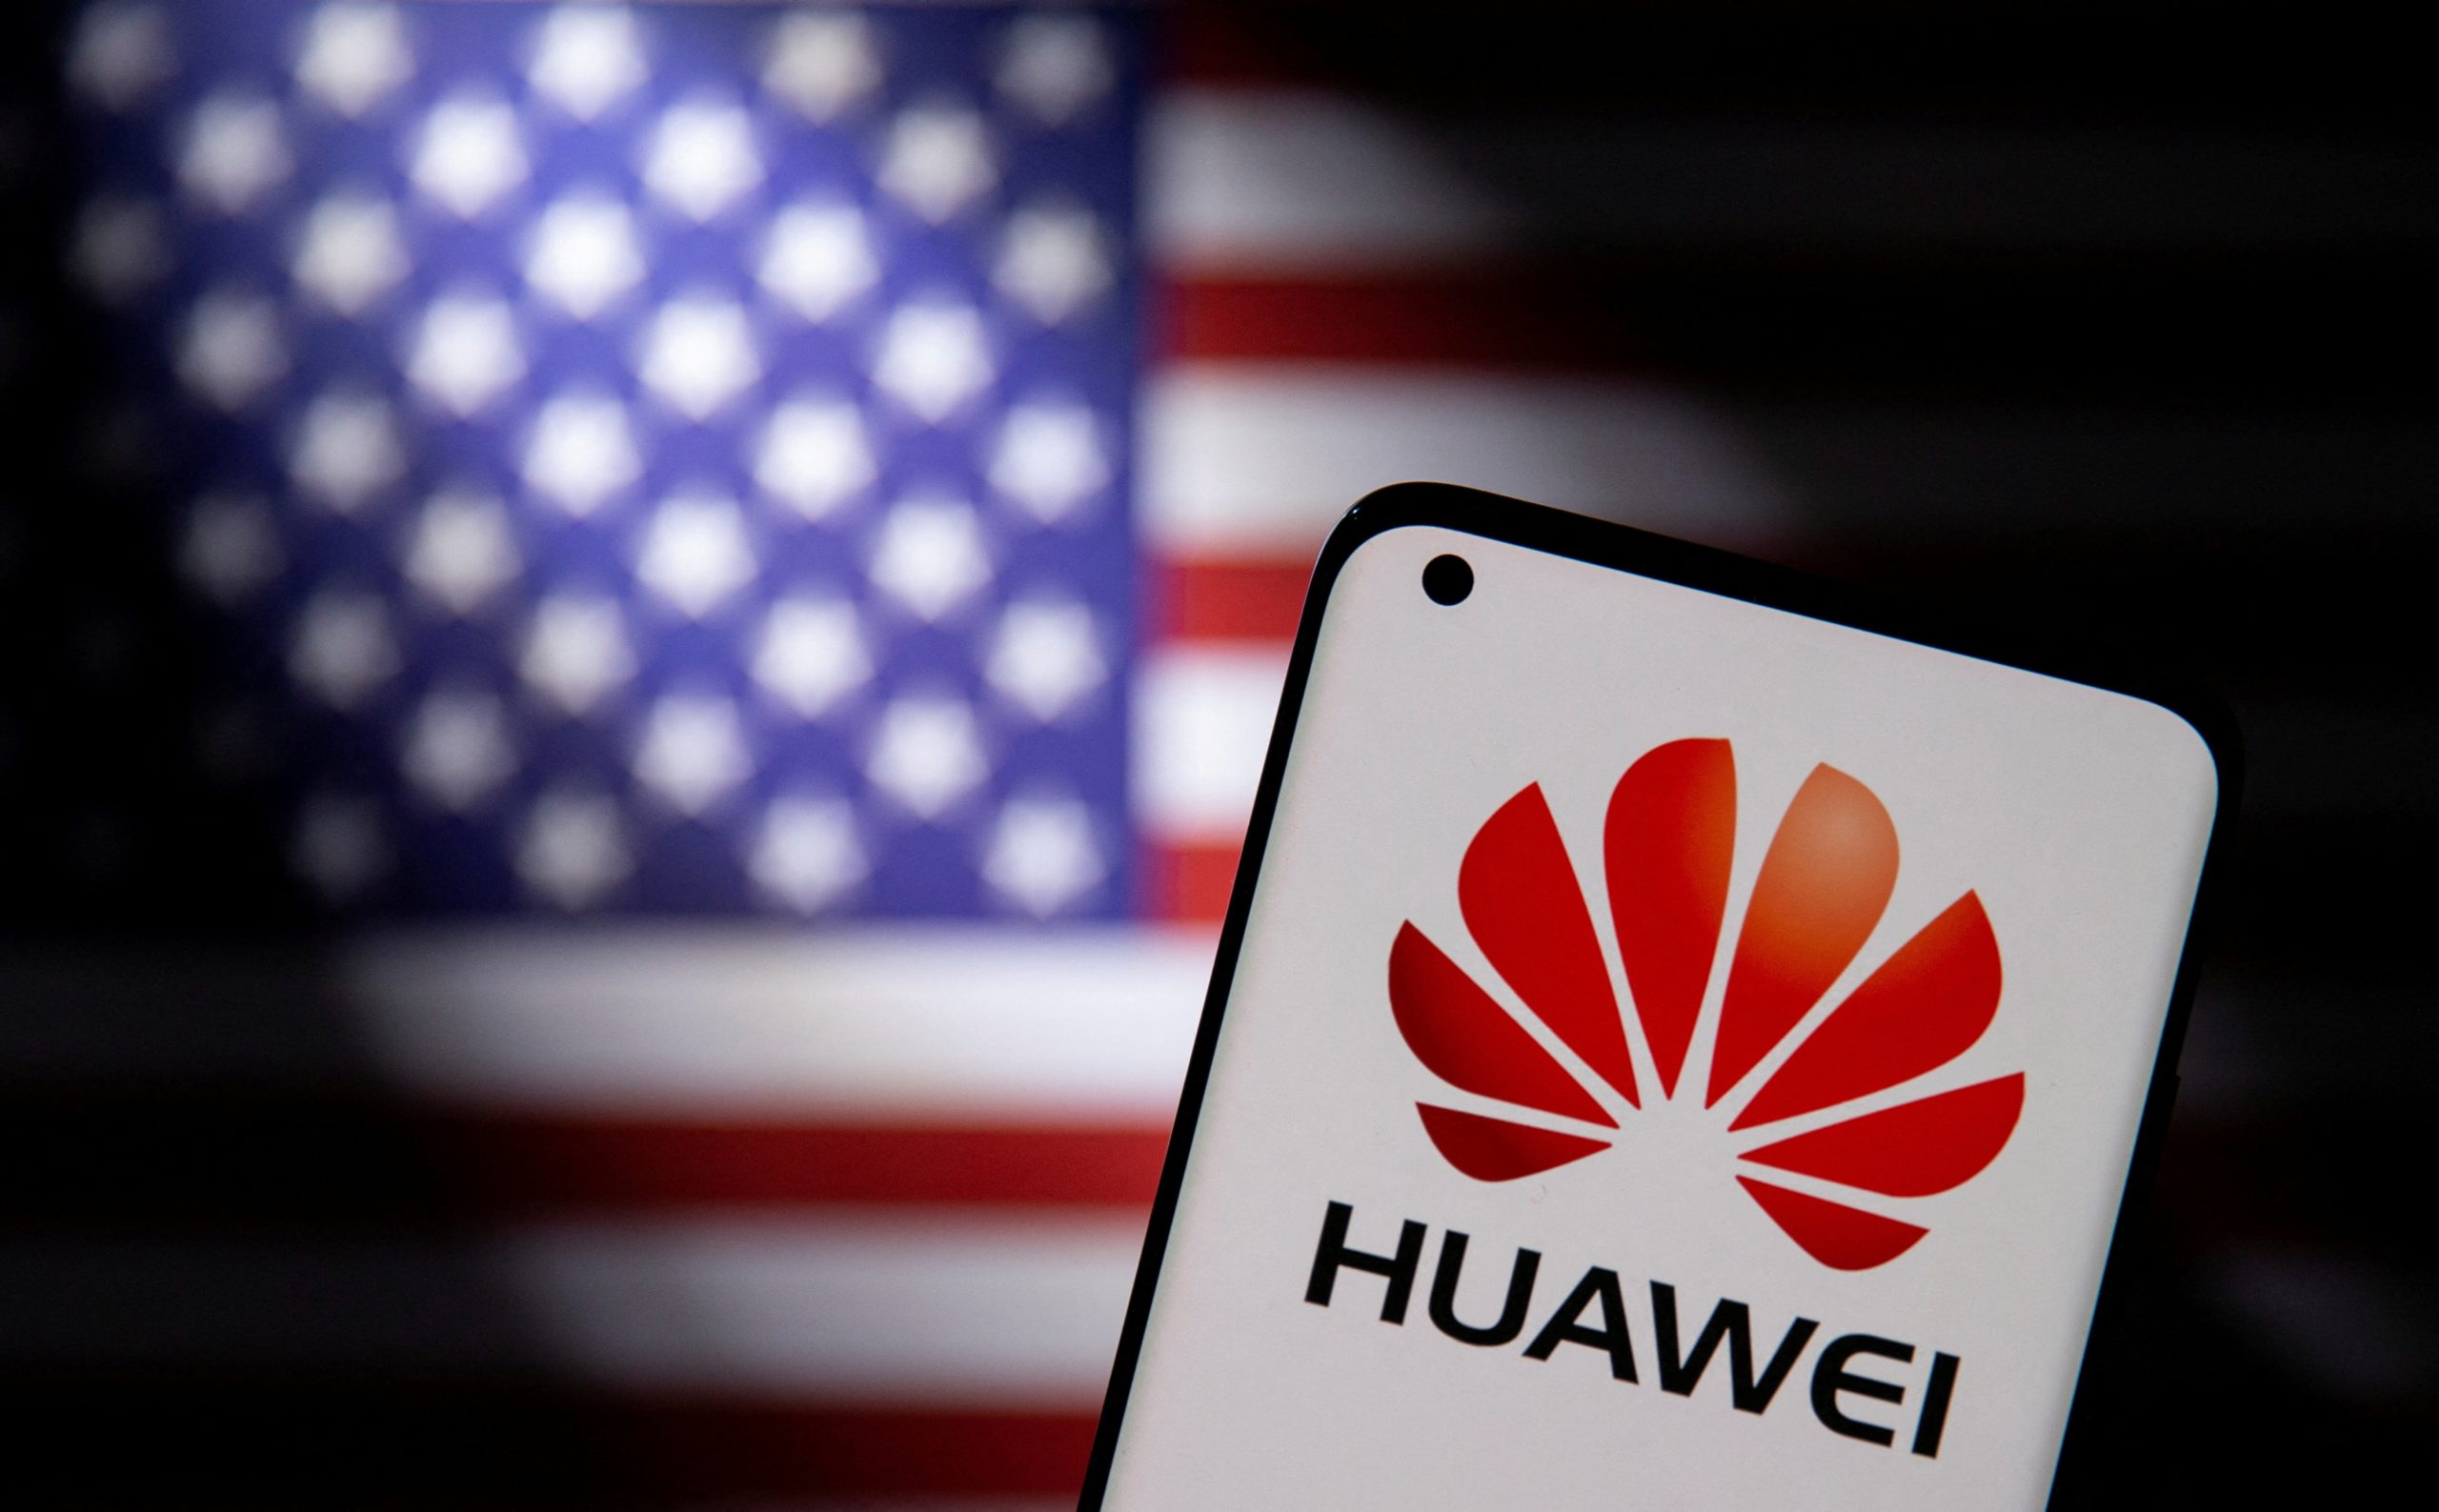 Impact on Huawei's Product Lines